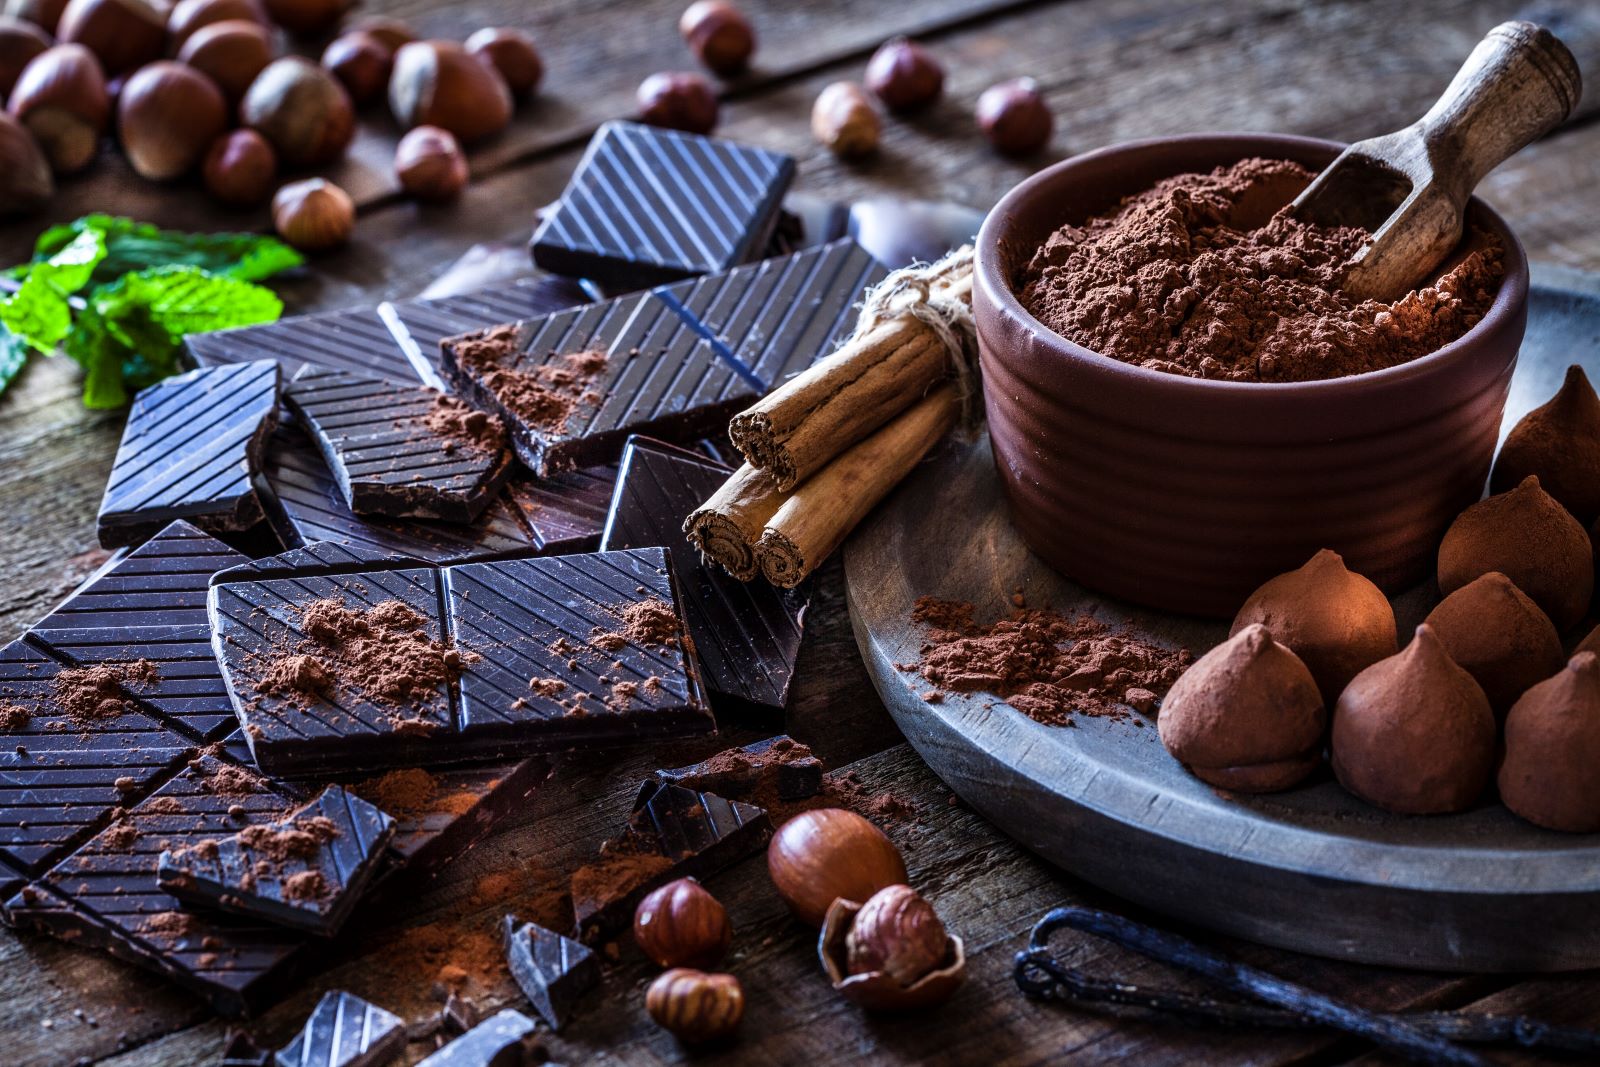 Lead and Cadmium in Dark Chocolate? Who Should Be Concerned and Why